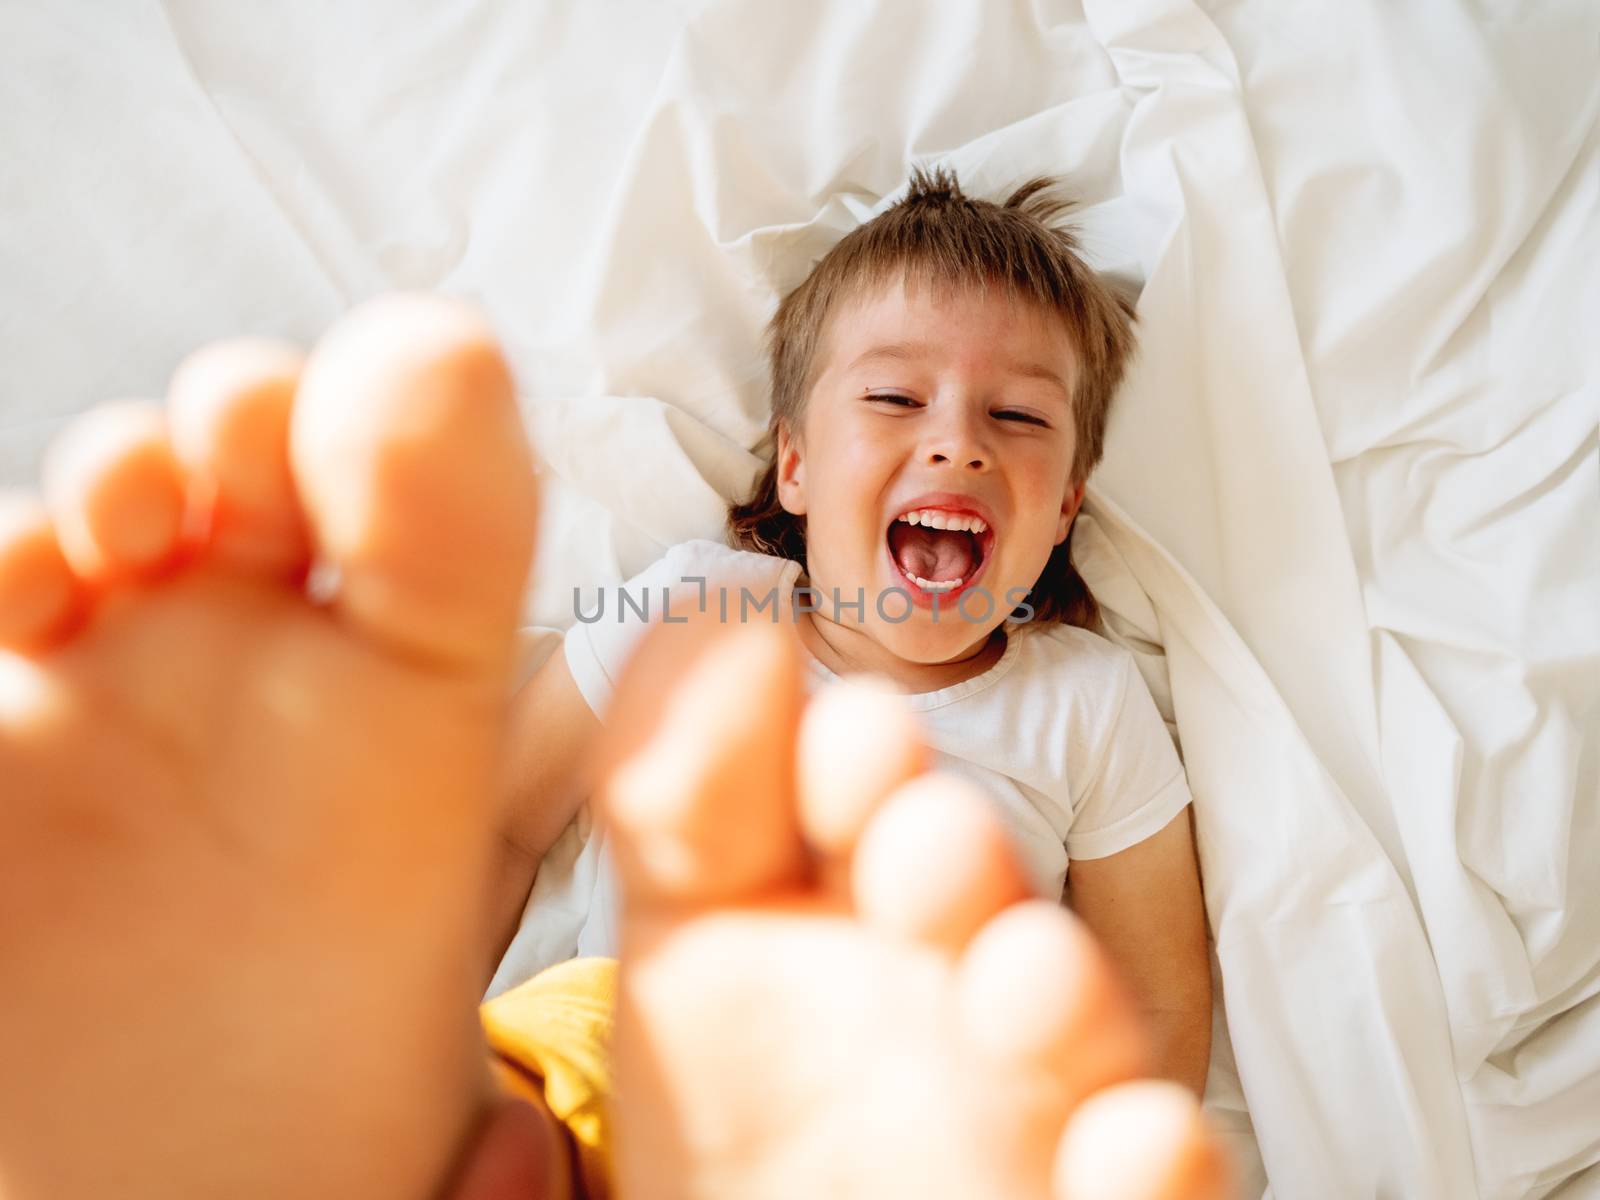 Little boy is lying upside down on the bed and laughing happily. Joyful toddler. Playful child shows his feet in the air. Sunny morning in cozy home.